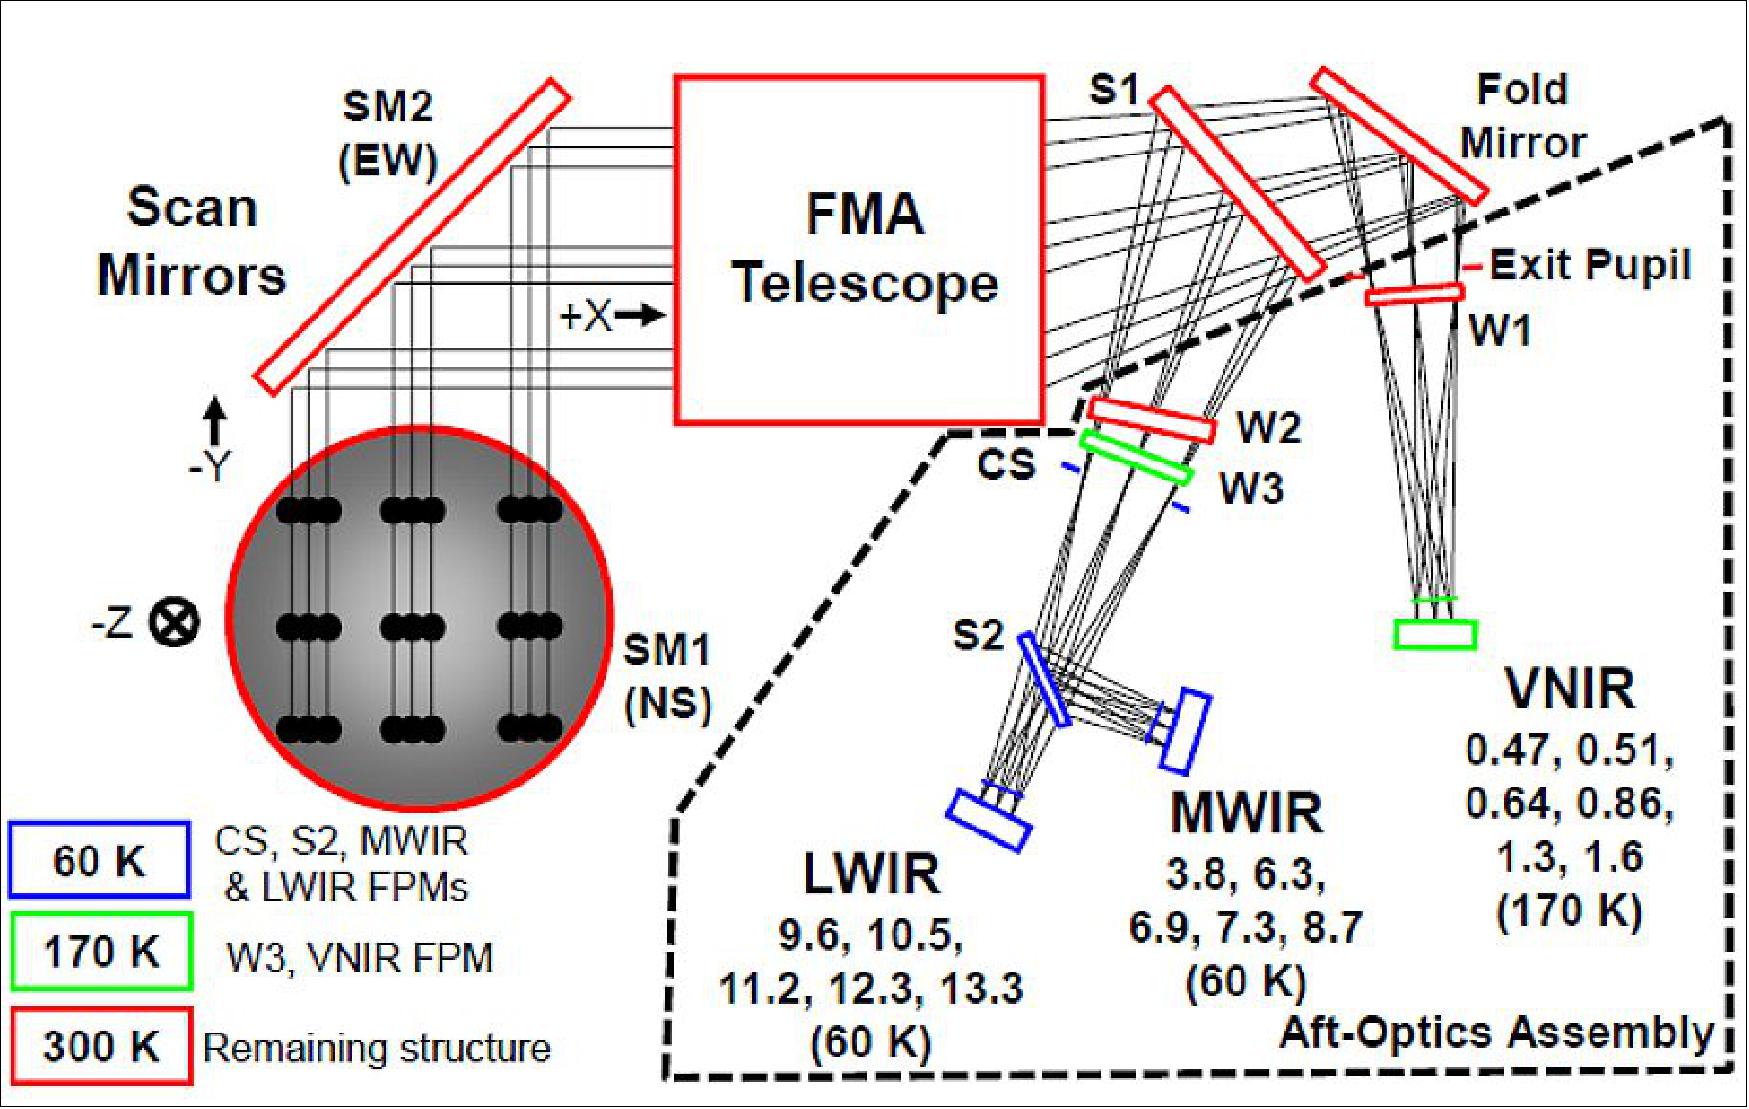 Figure 18: Schematic view of the AMI optical layout (image credit: Harris Corporation)